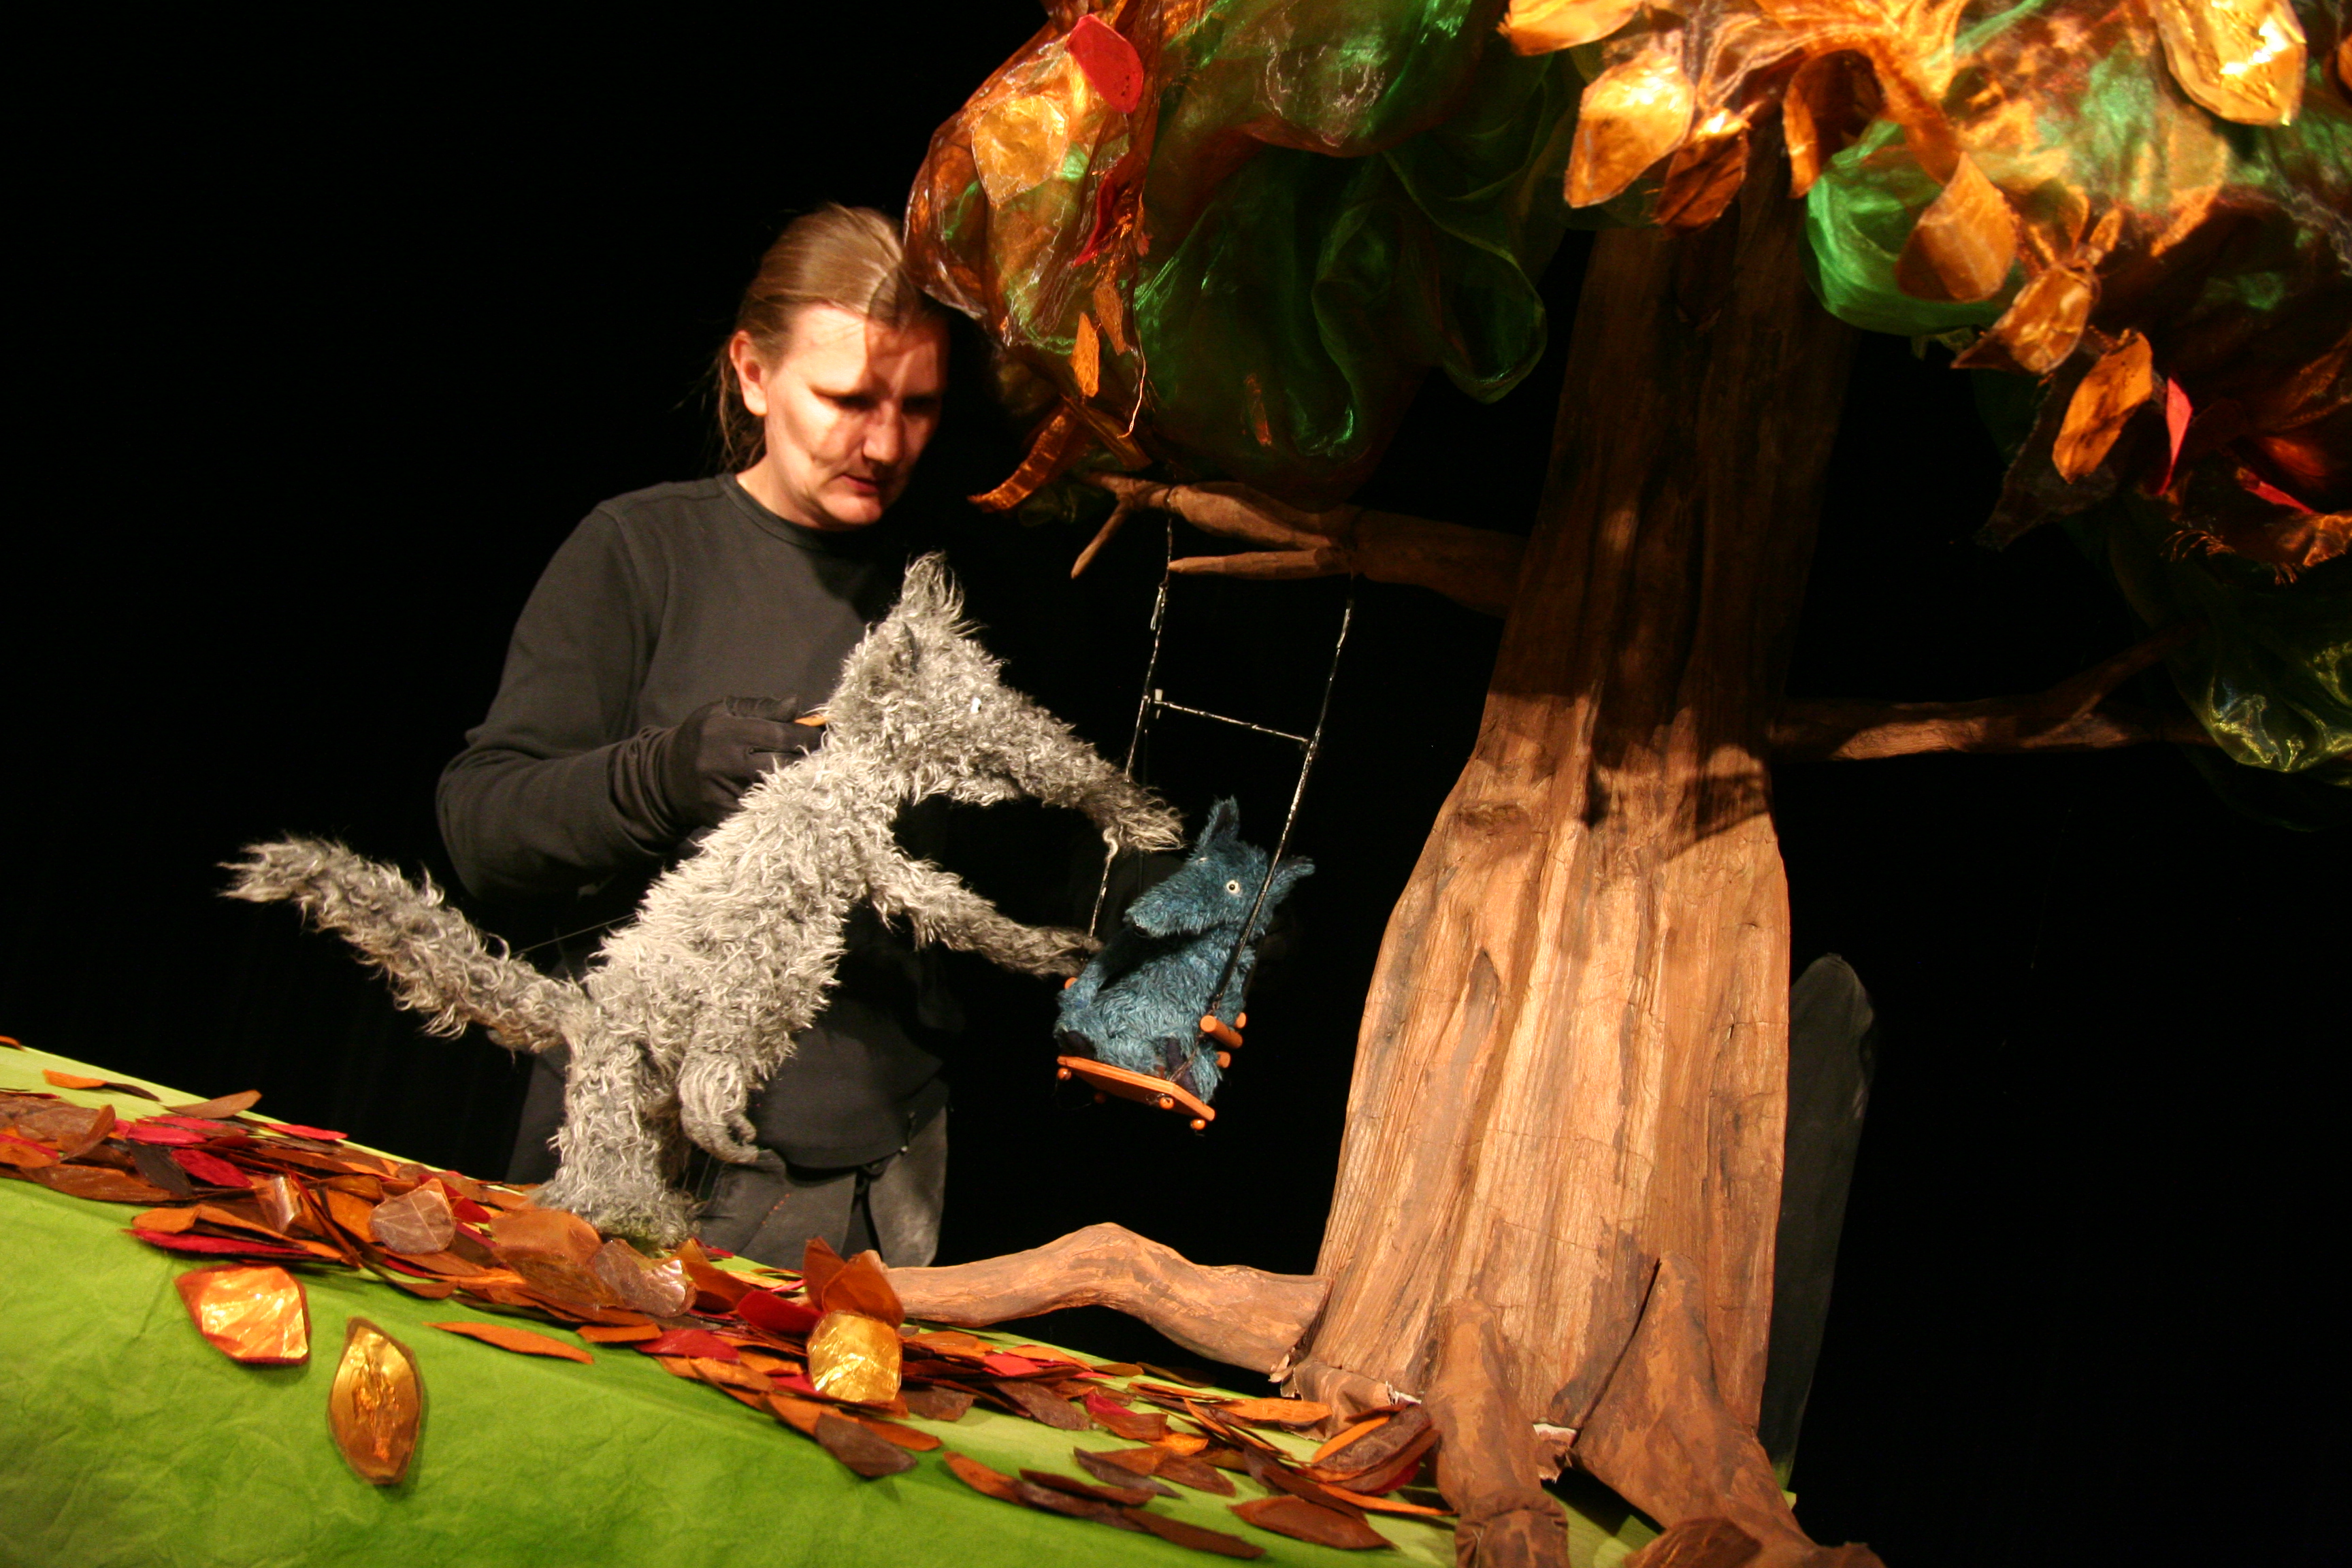 The figure of a gray wolf stands under a large tree with autumn leaves. A swing is attached to the tree, on which a small blue wolf is sitting. The two wolves are led by a dark-clad puppeteer in the background.